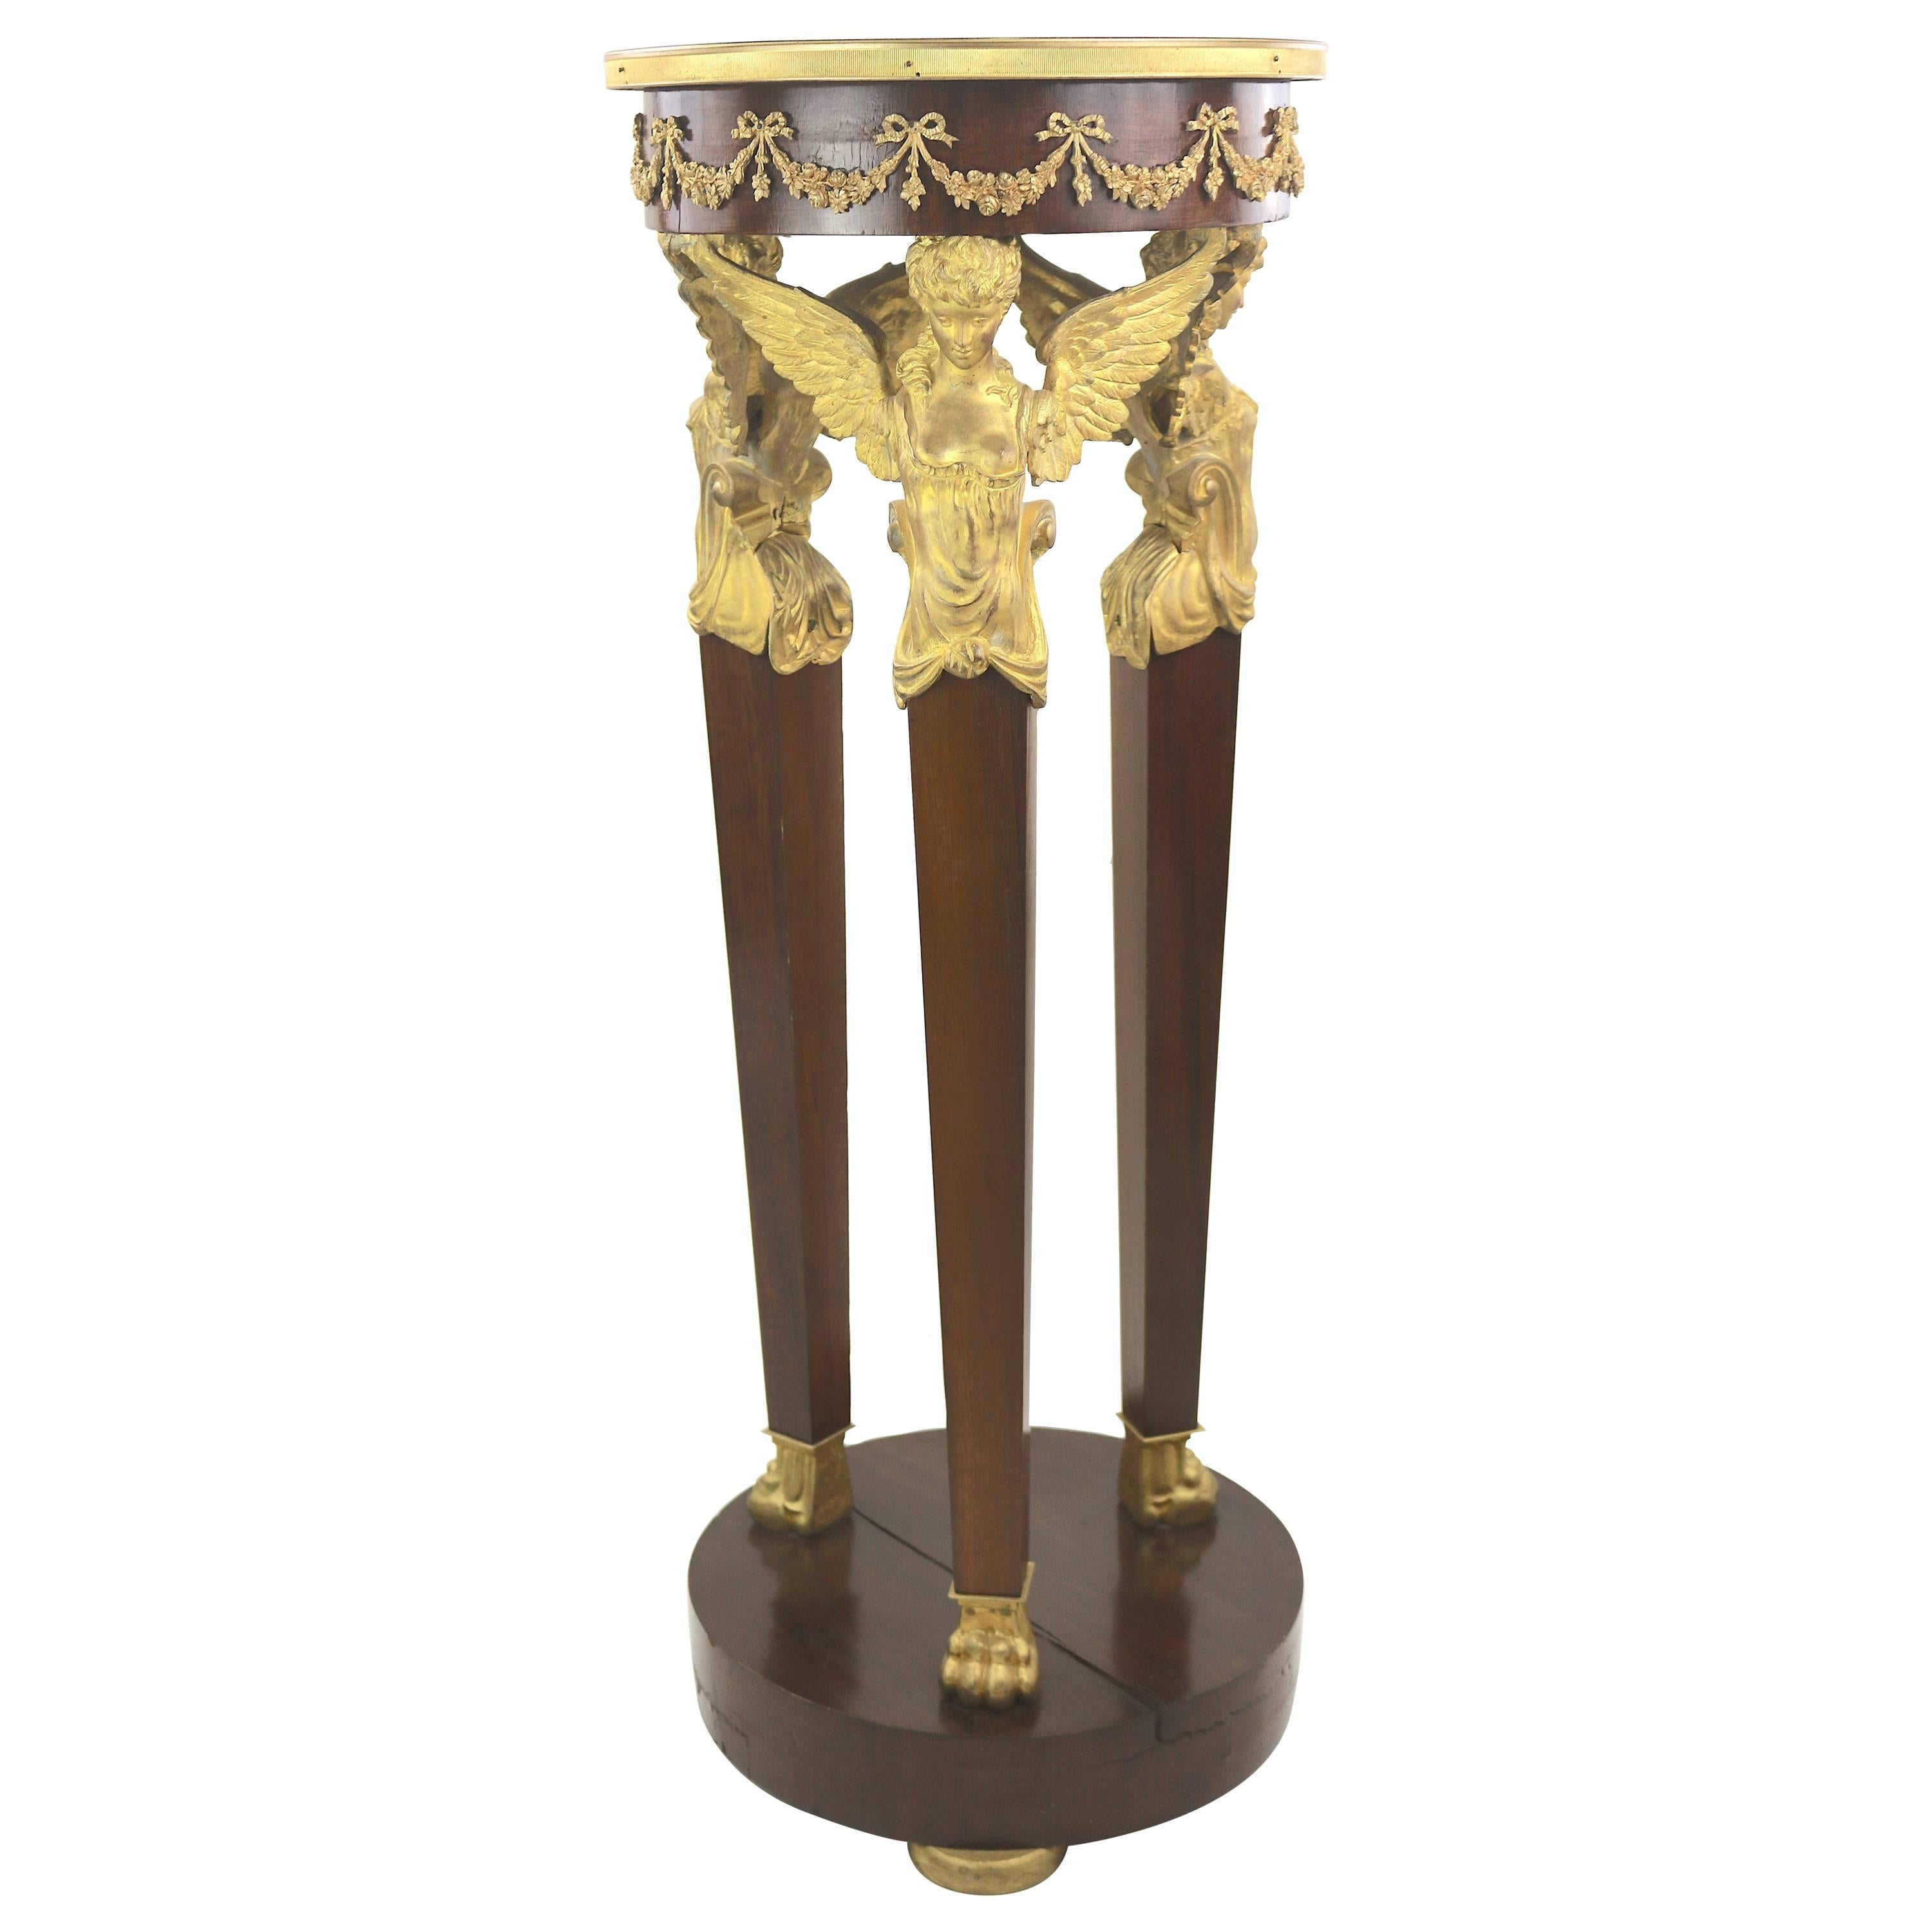 French Empire Period Gilt Mahogany Pedestal, Gilt Winged Caryatids For Sale